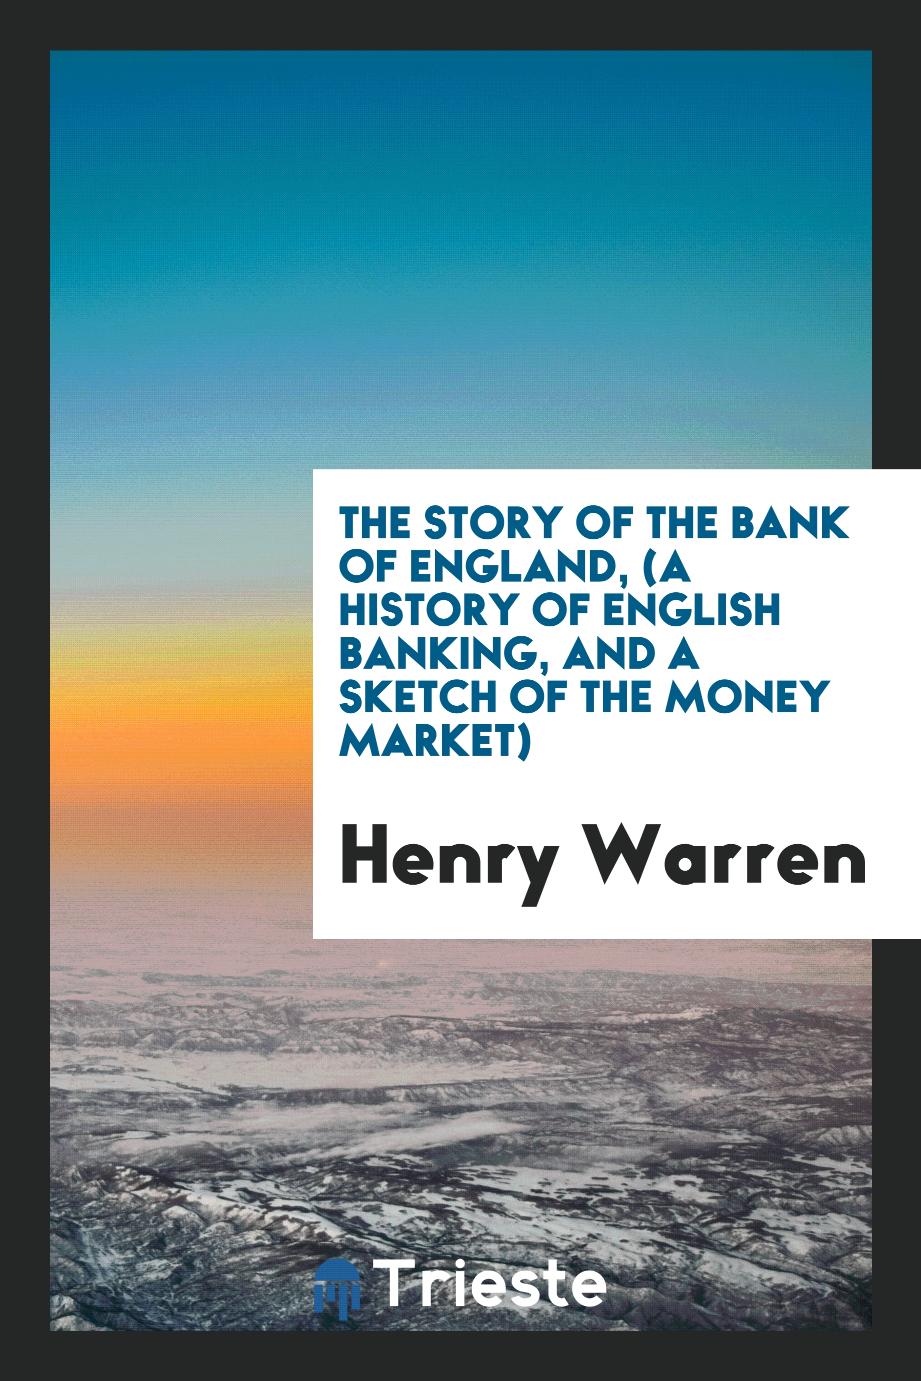 The story of the Bank of England, (a history of English banking, and a sketch of the money market)